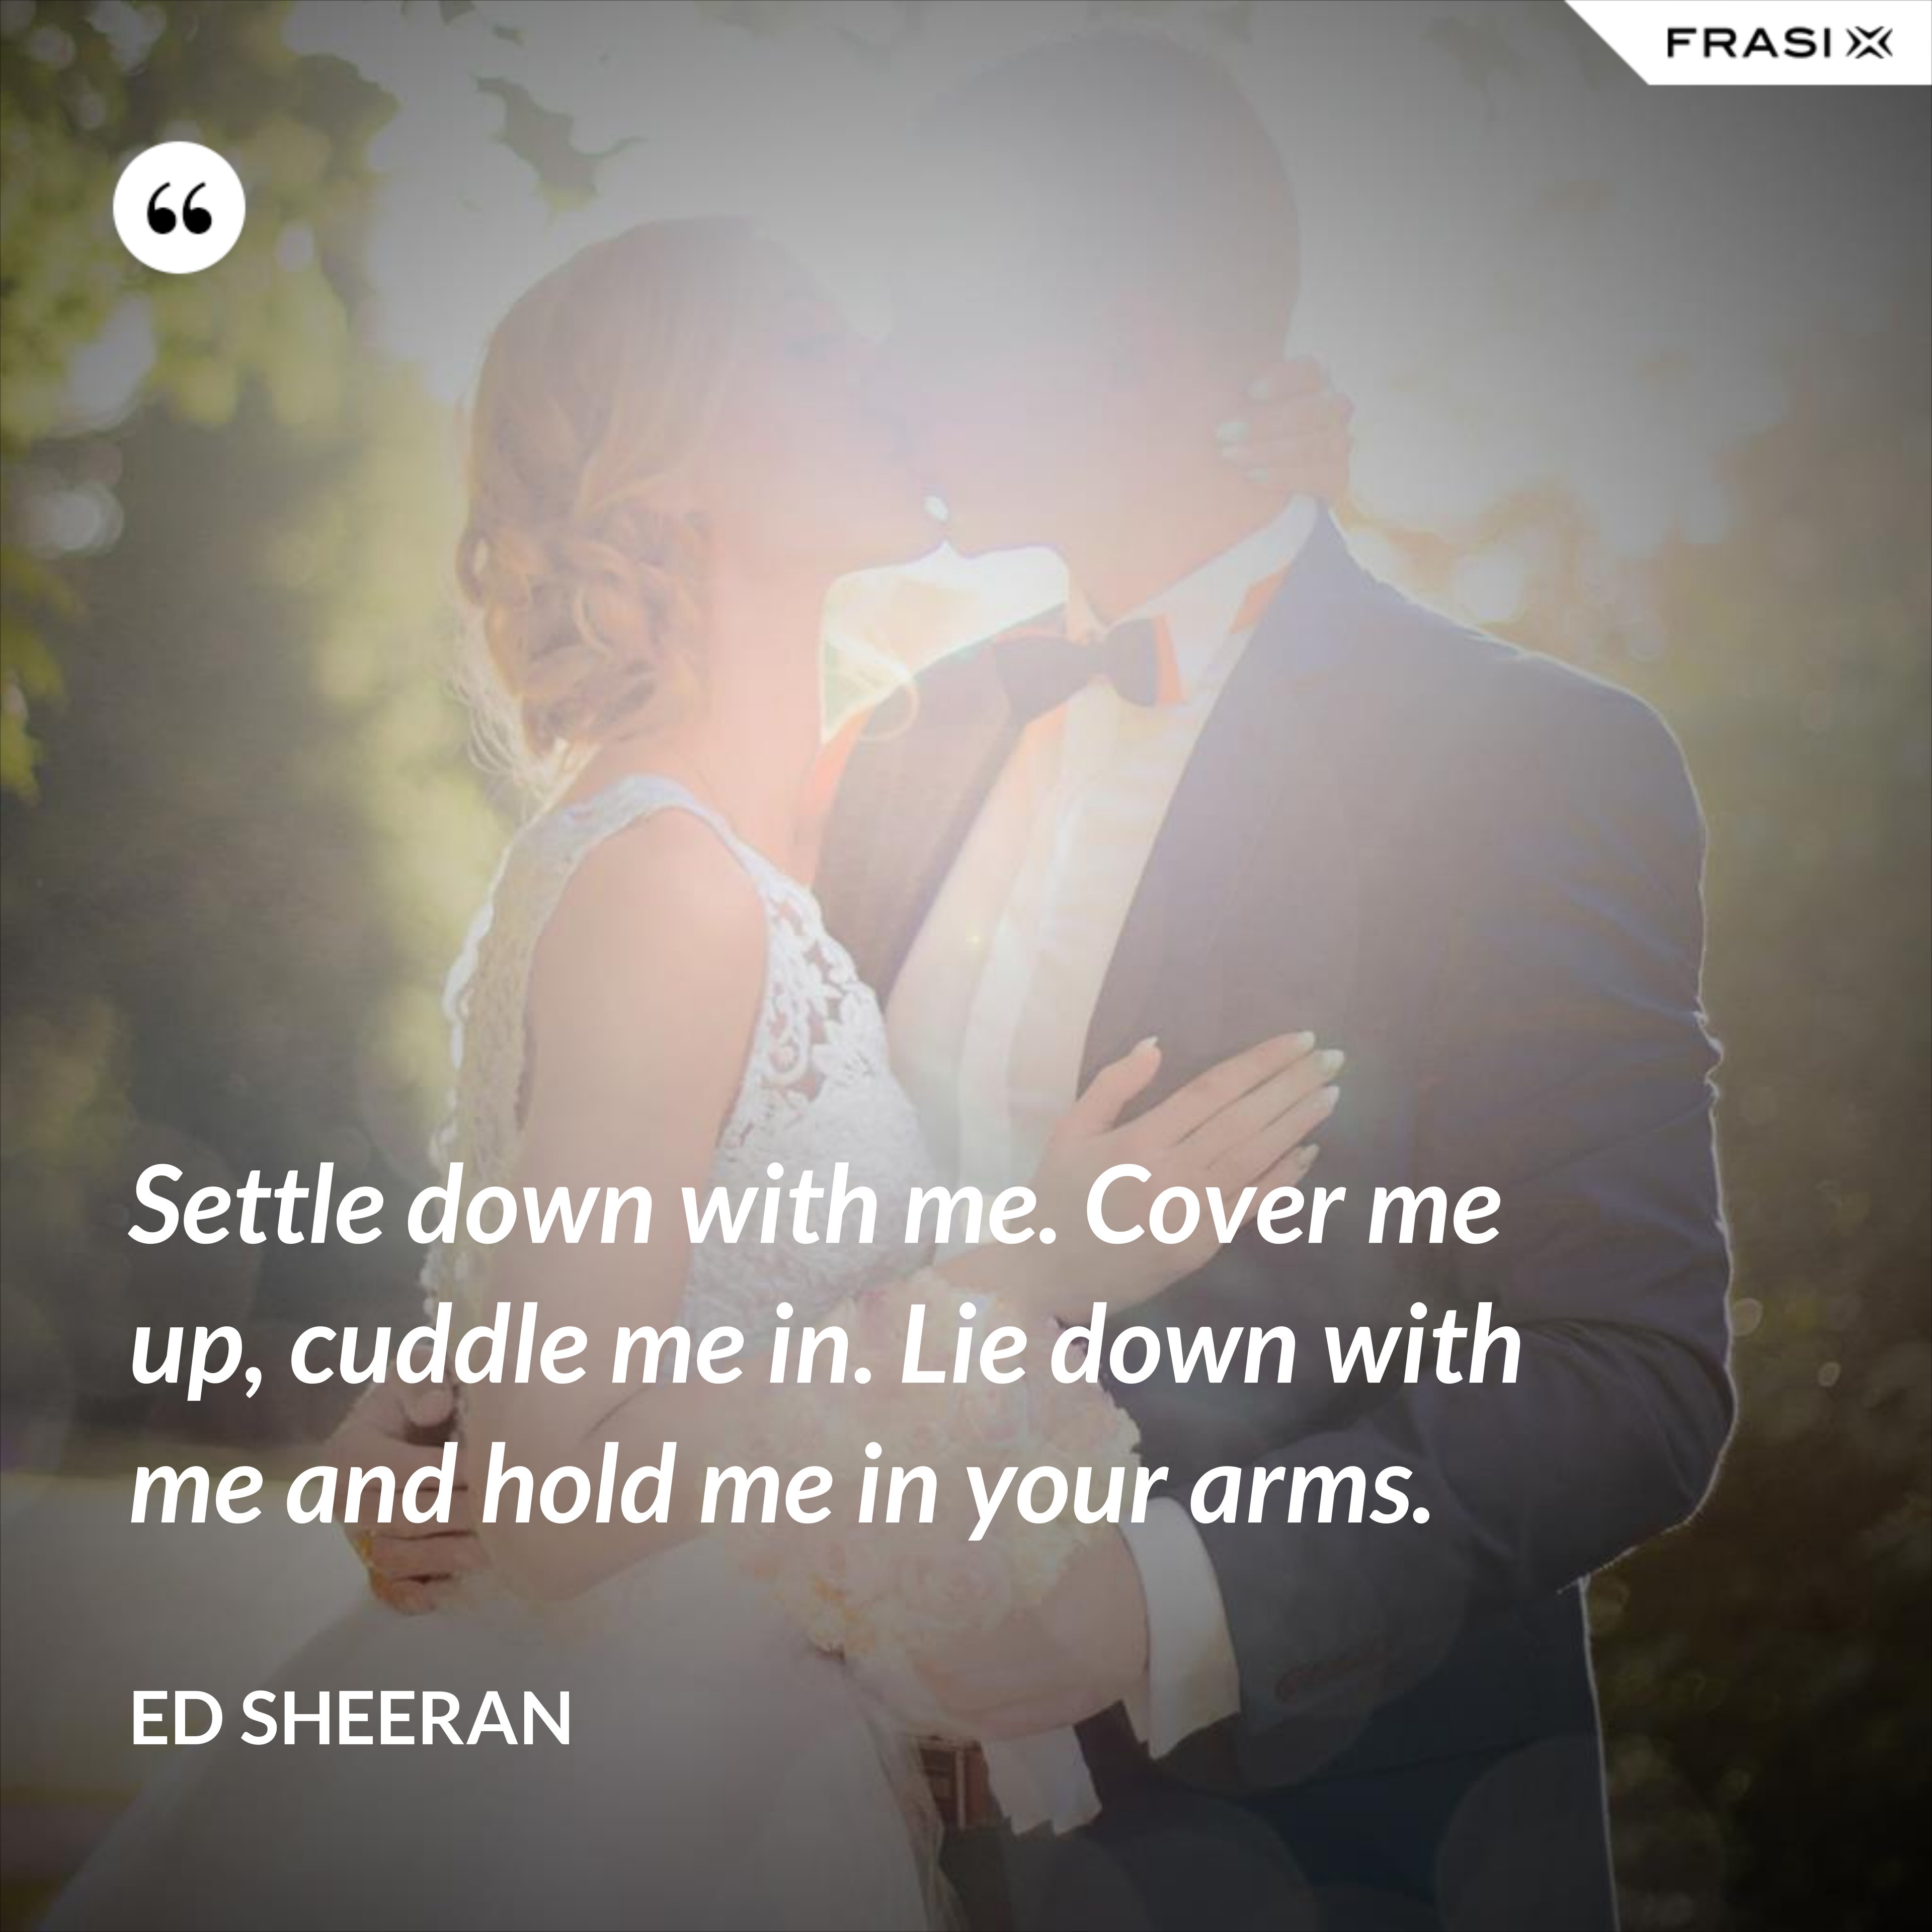 Settle down with me. Cover me up, cuddle me in. Lie down with me and hold me in your arms. - Ed Sheeran